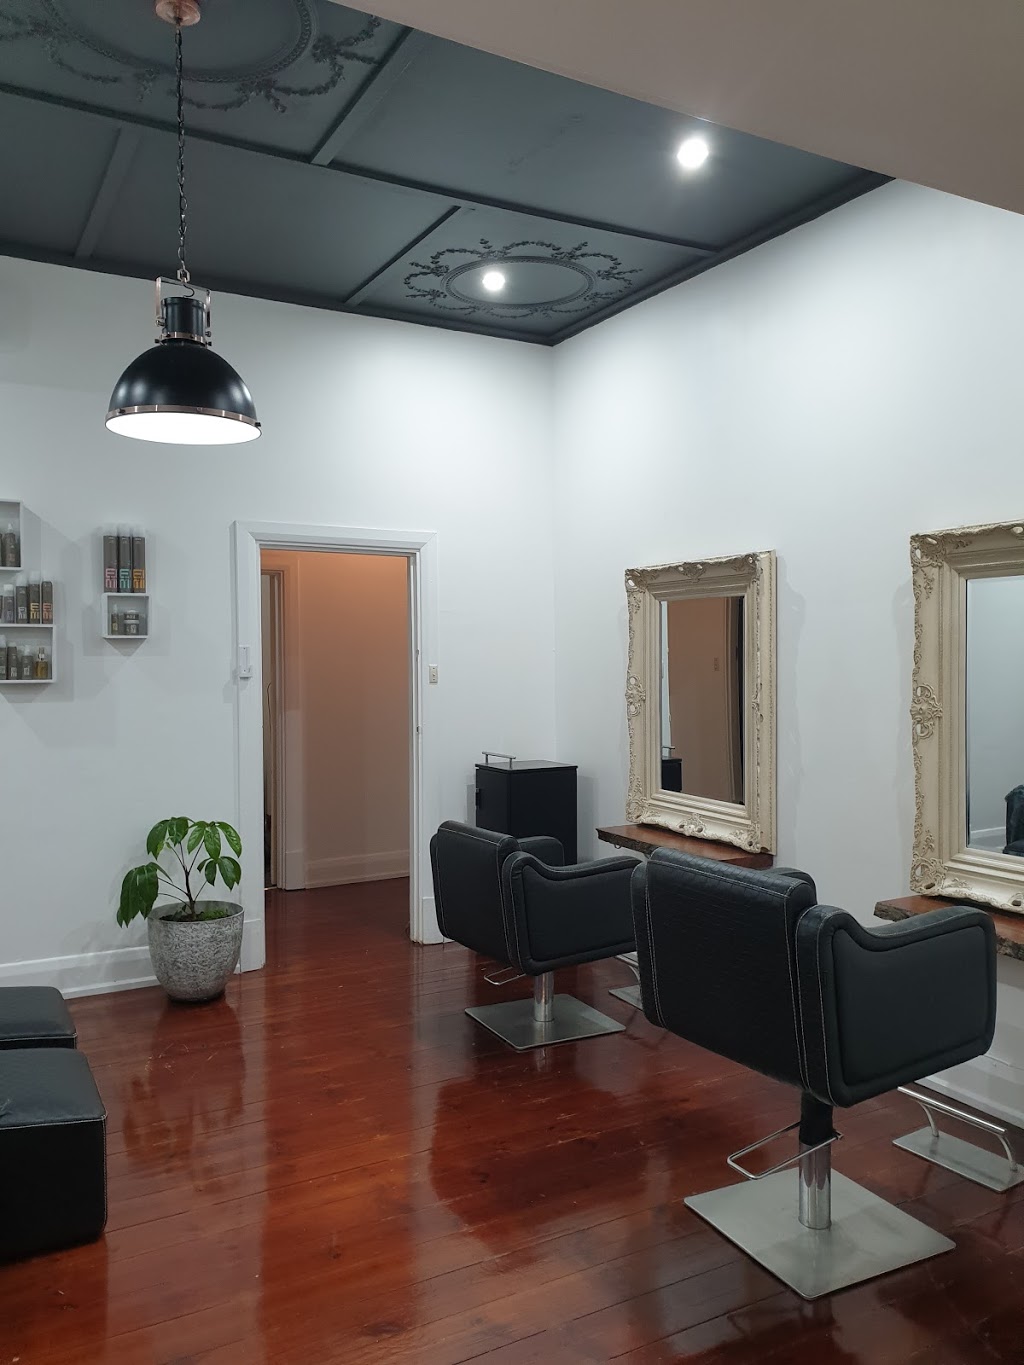 Whyalla Hair Gallery | hair care | 56 Patterson St, Whyalla SA 5600, Australia | 0484001754 OR +61 484 001 754